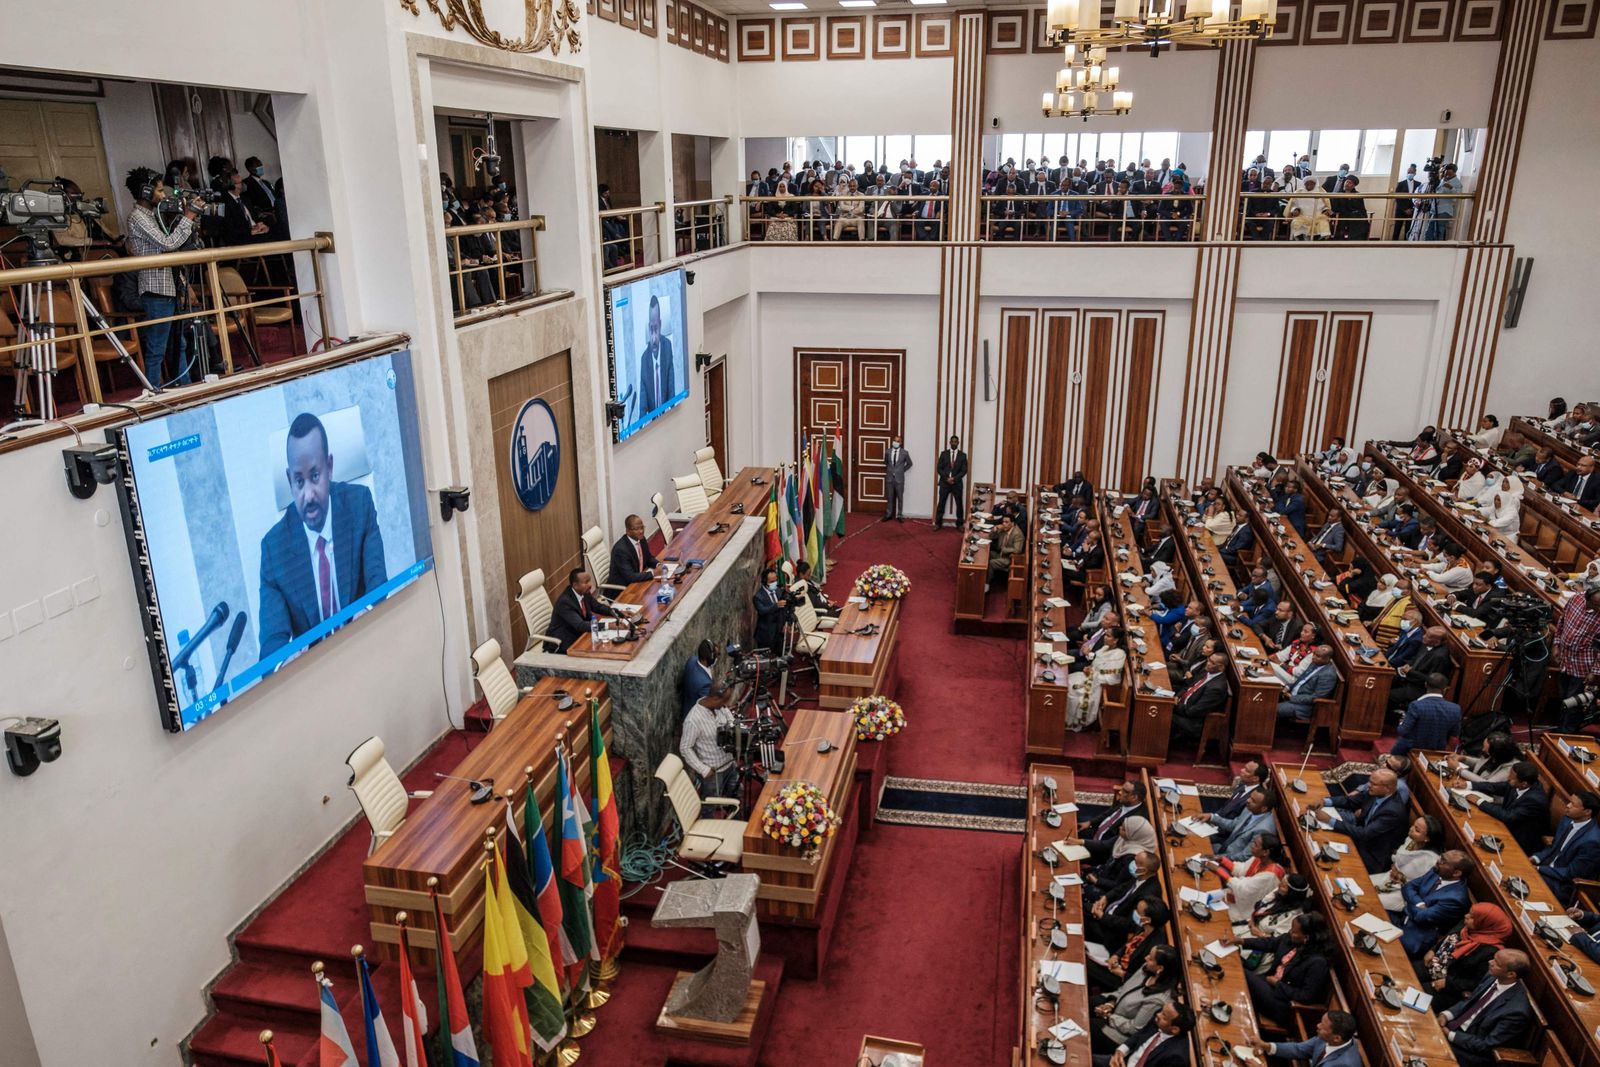 Ethiopian Primer Minister Abiy Ahmed (L) addresses the members of the Parliament during a session, in the city of Addis Ababa, Ethiopia, on June 14, 2022. (Photo by EDUARDO SOTERAS / AFP) - AFP